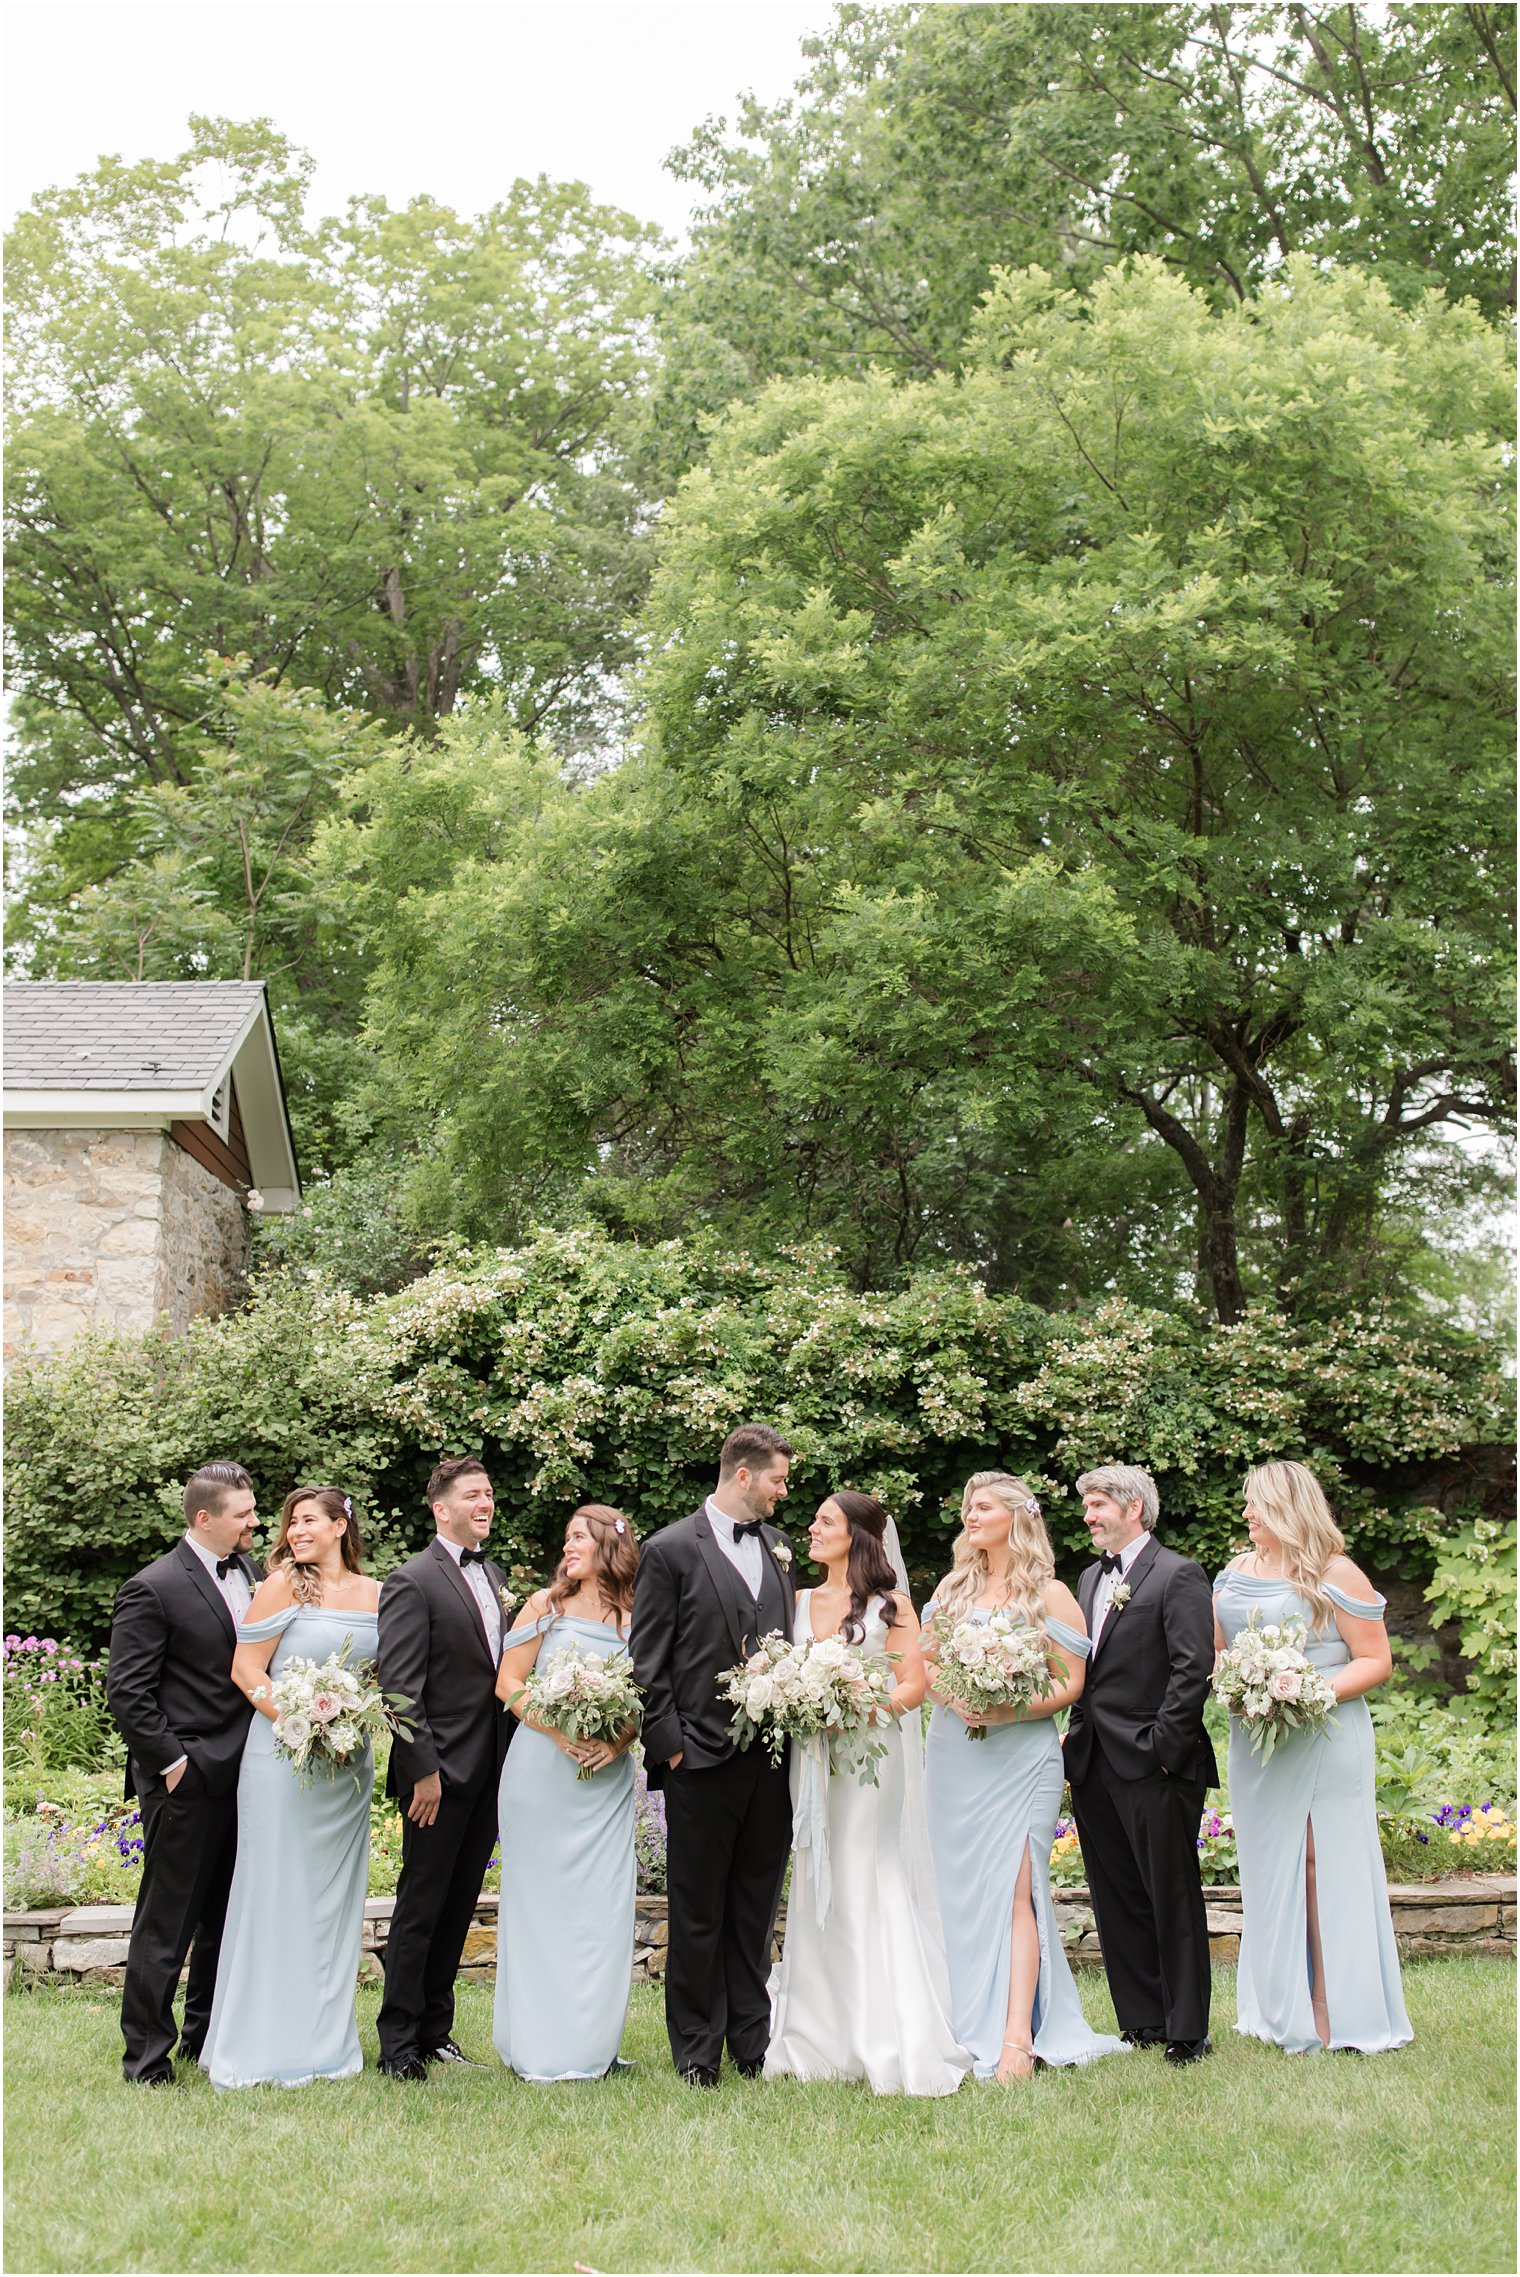 Candid photo of wedding party at Crossed Keys Estate